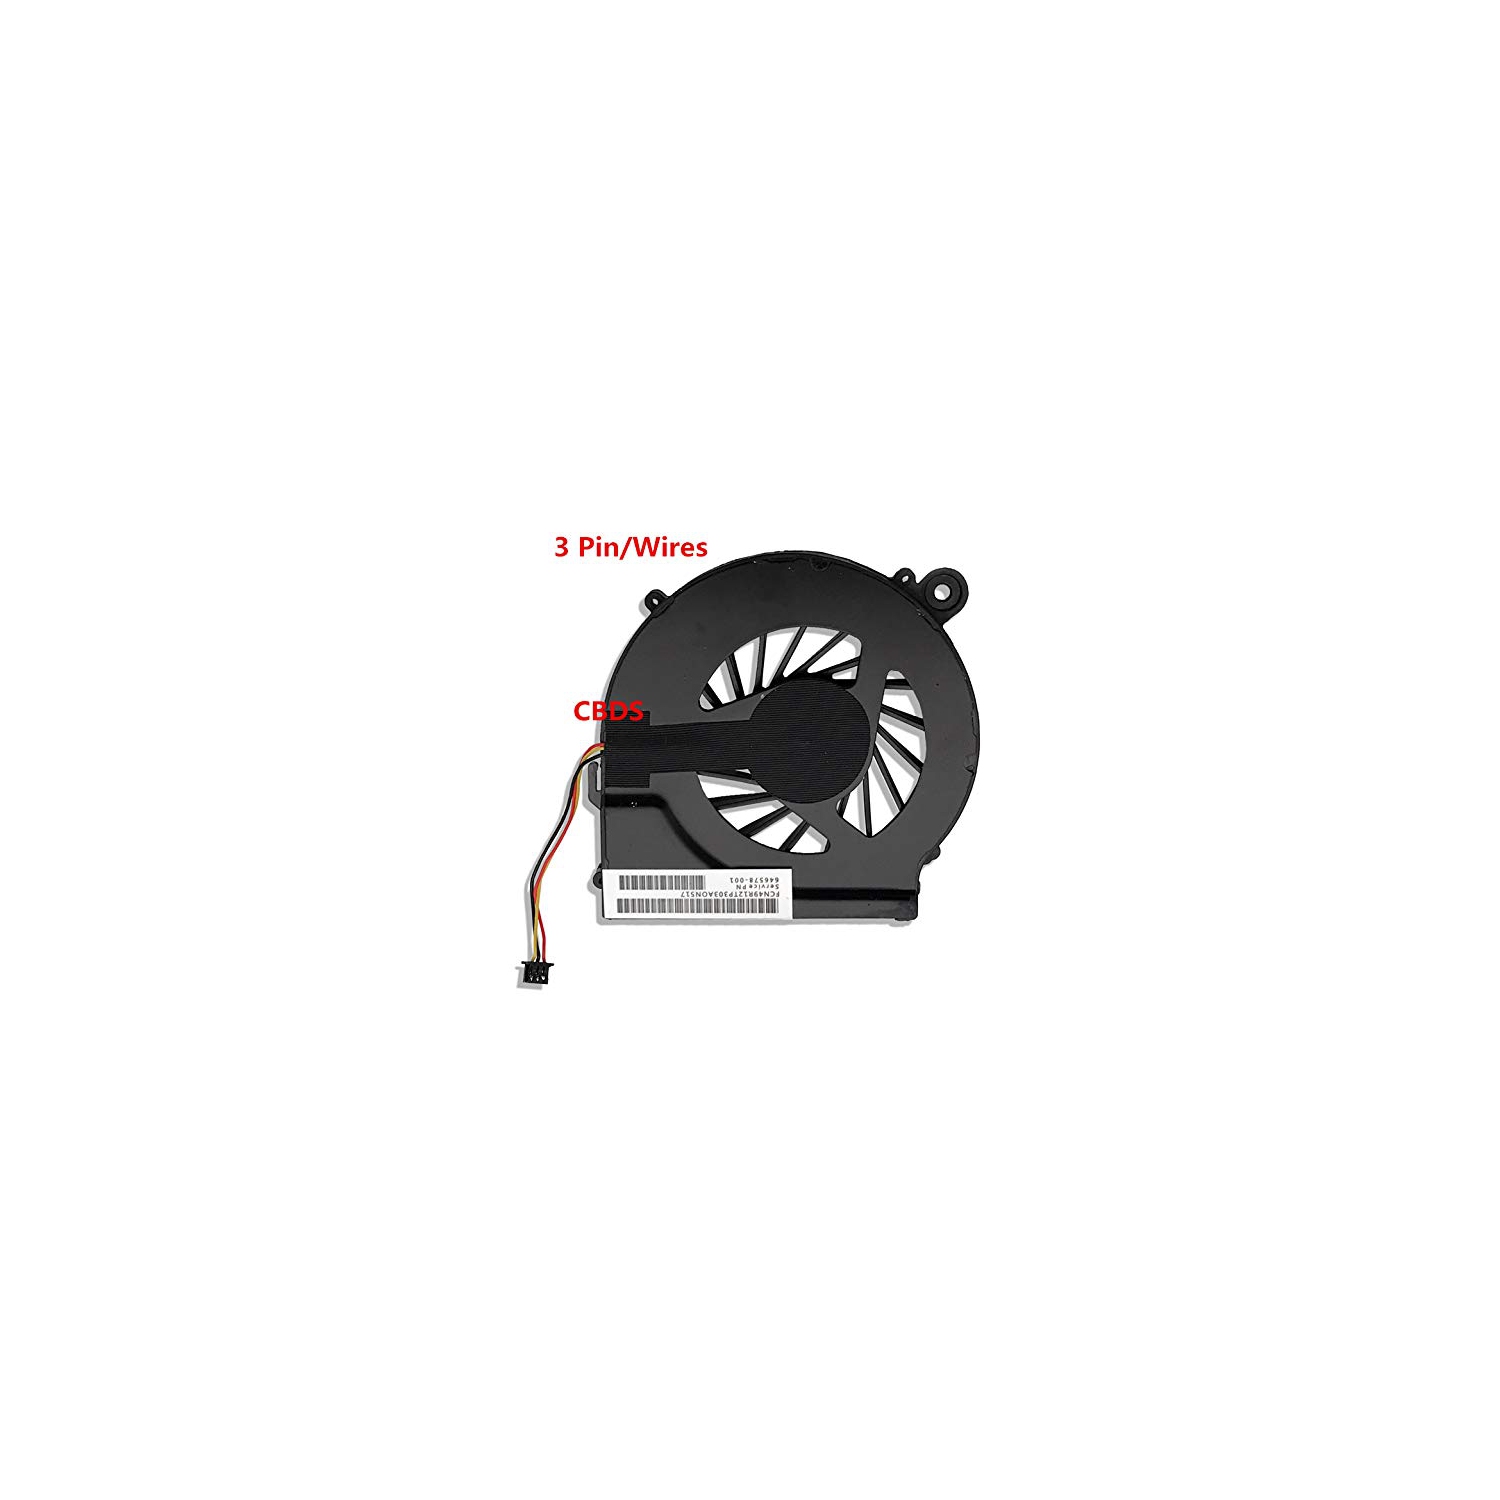 (CBDS) Replacement Parts 3 Pin 3 Wires CPU Cooling Fan - Compatible with HP Pavilion 3 Pin 3 Wires G6 G6-1000 G6-1100